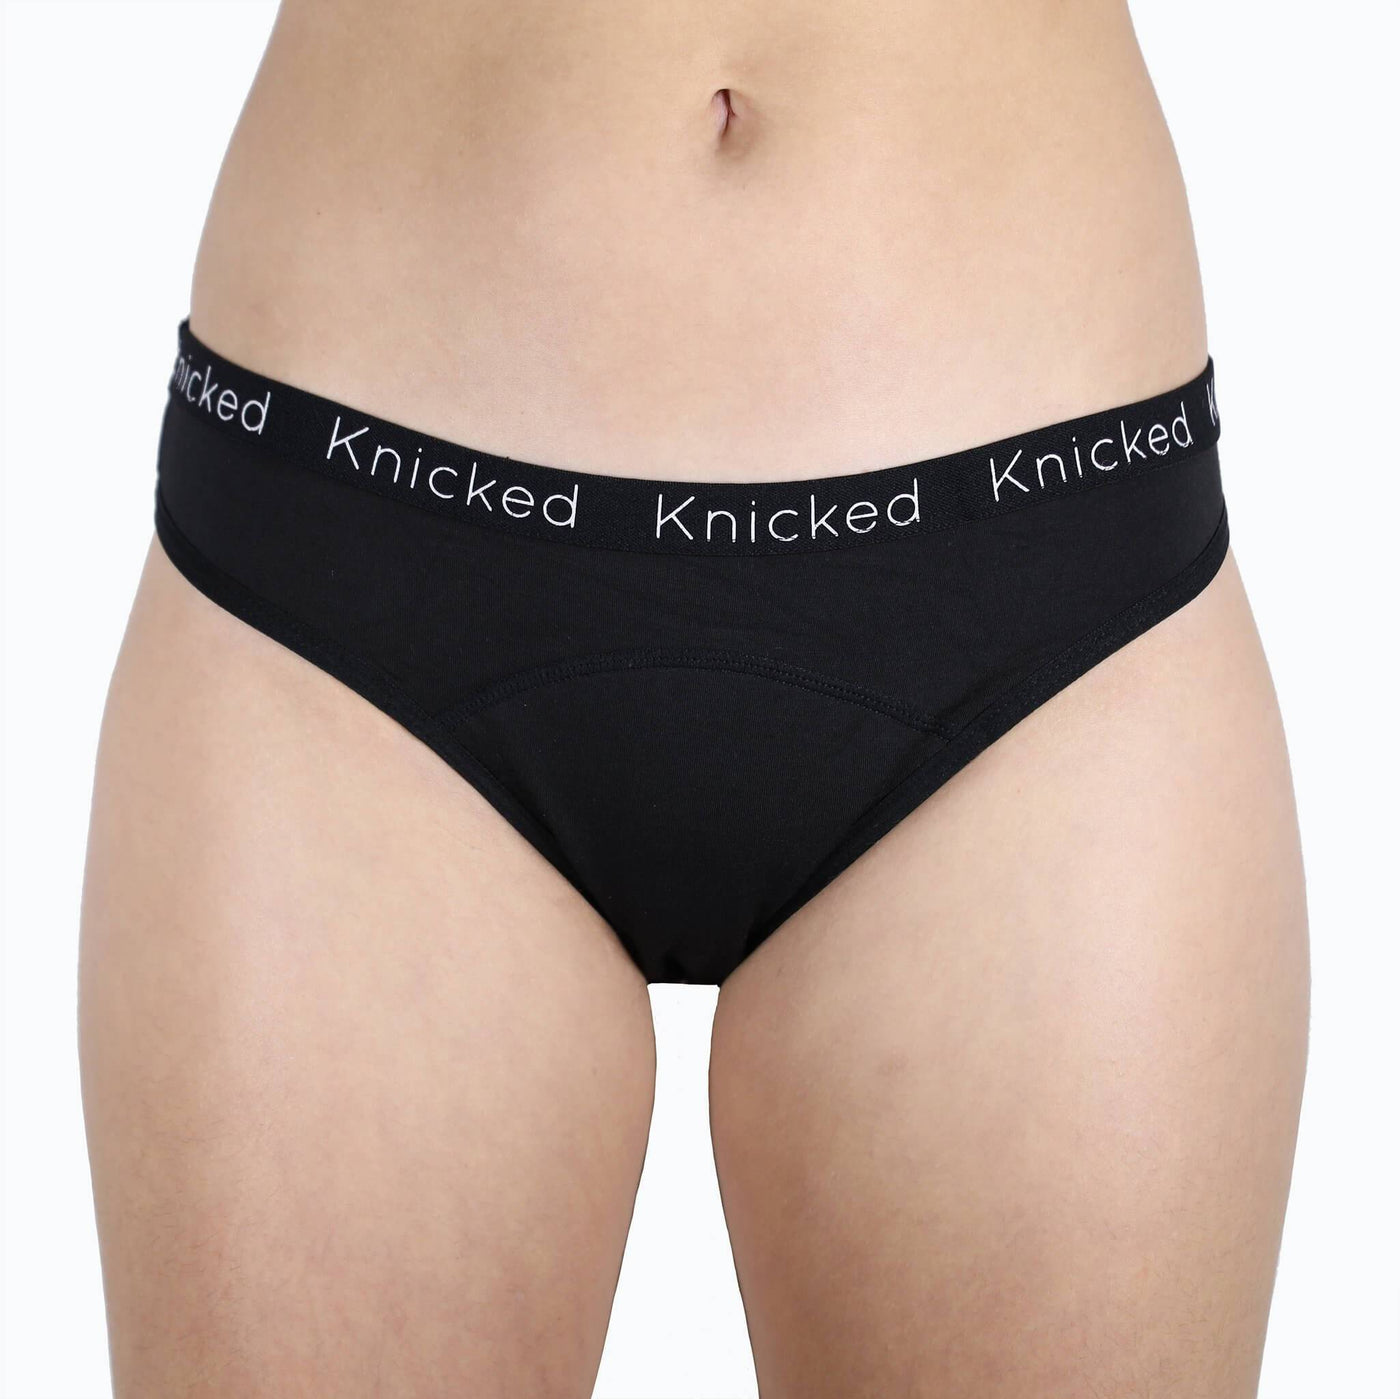 Knicked Pre-Period/Light Absorbency Period Underwear - Soft Cotton-Knicked-Period Underwear